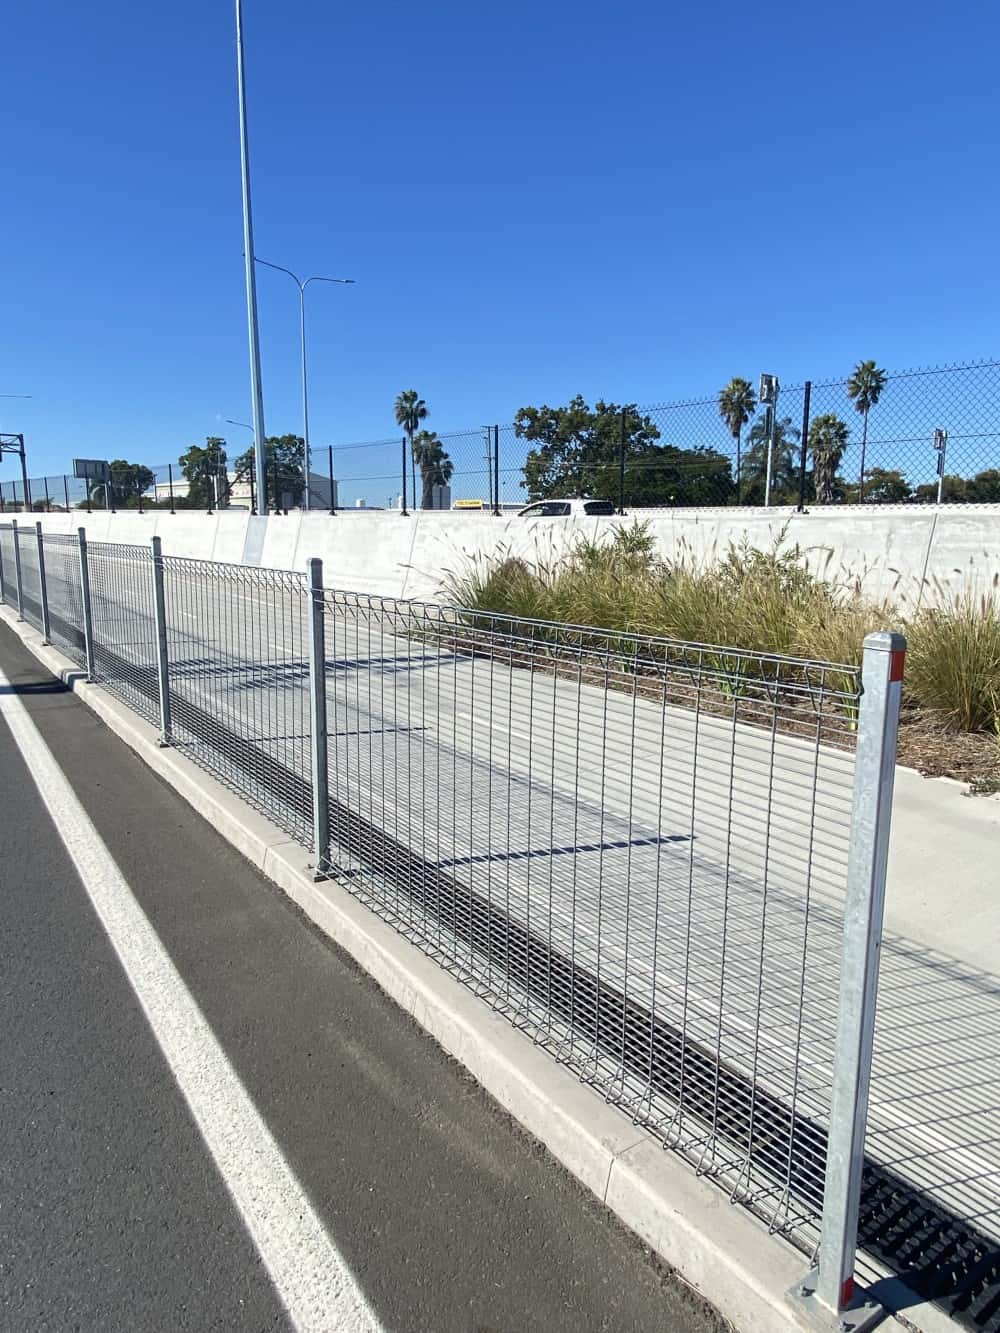 Security fencing for major roads and highways